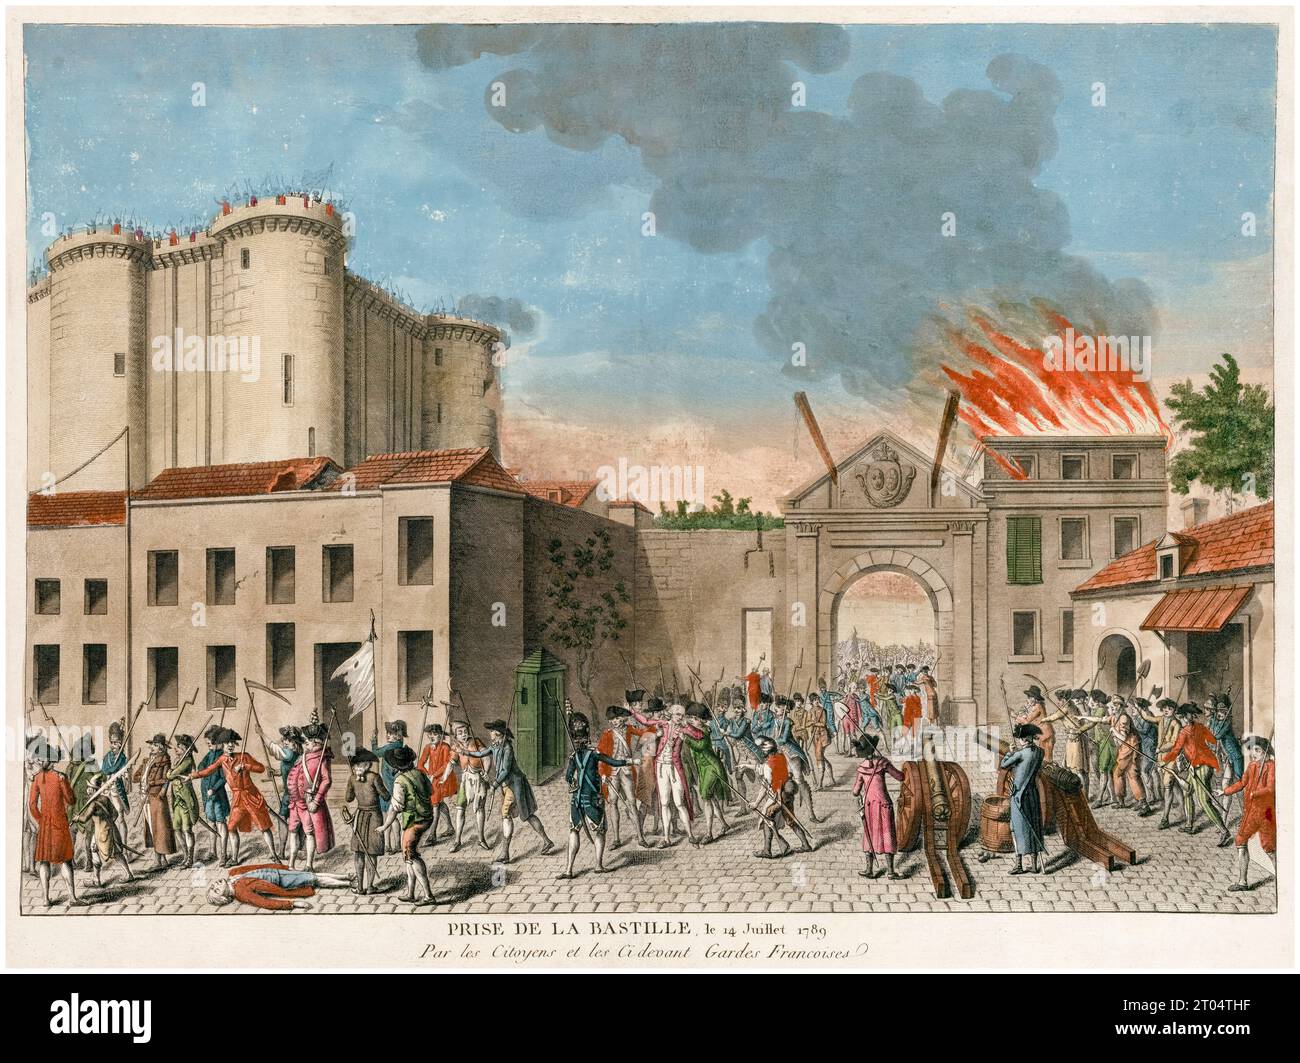 Storming of the Bastille, July 14th 1789, by the citizens and the former French Guards, French Revolution, hand coloured engraving, 1789 Stock Photo